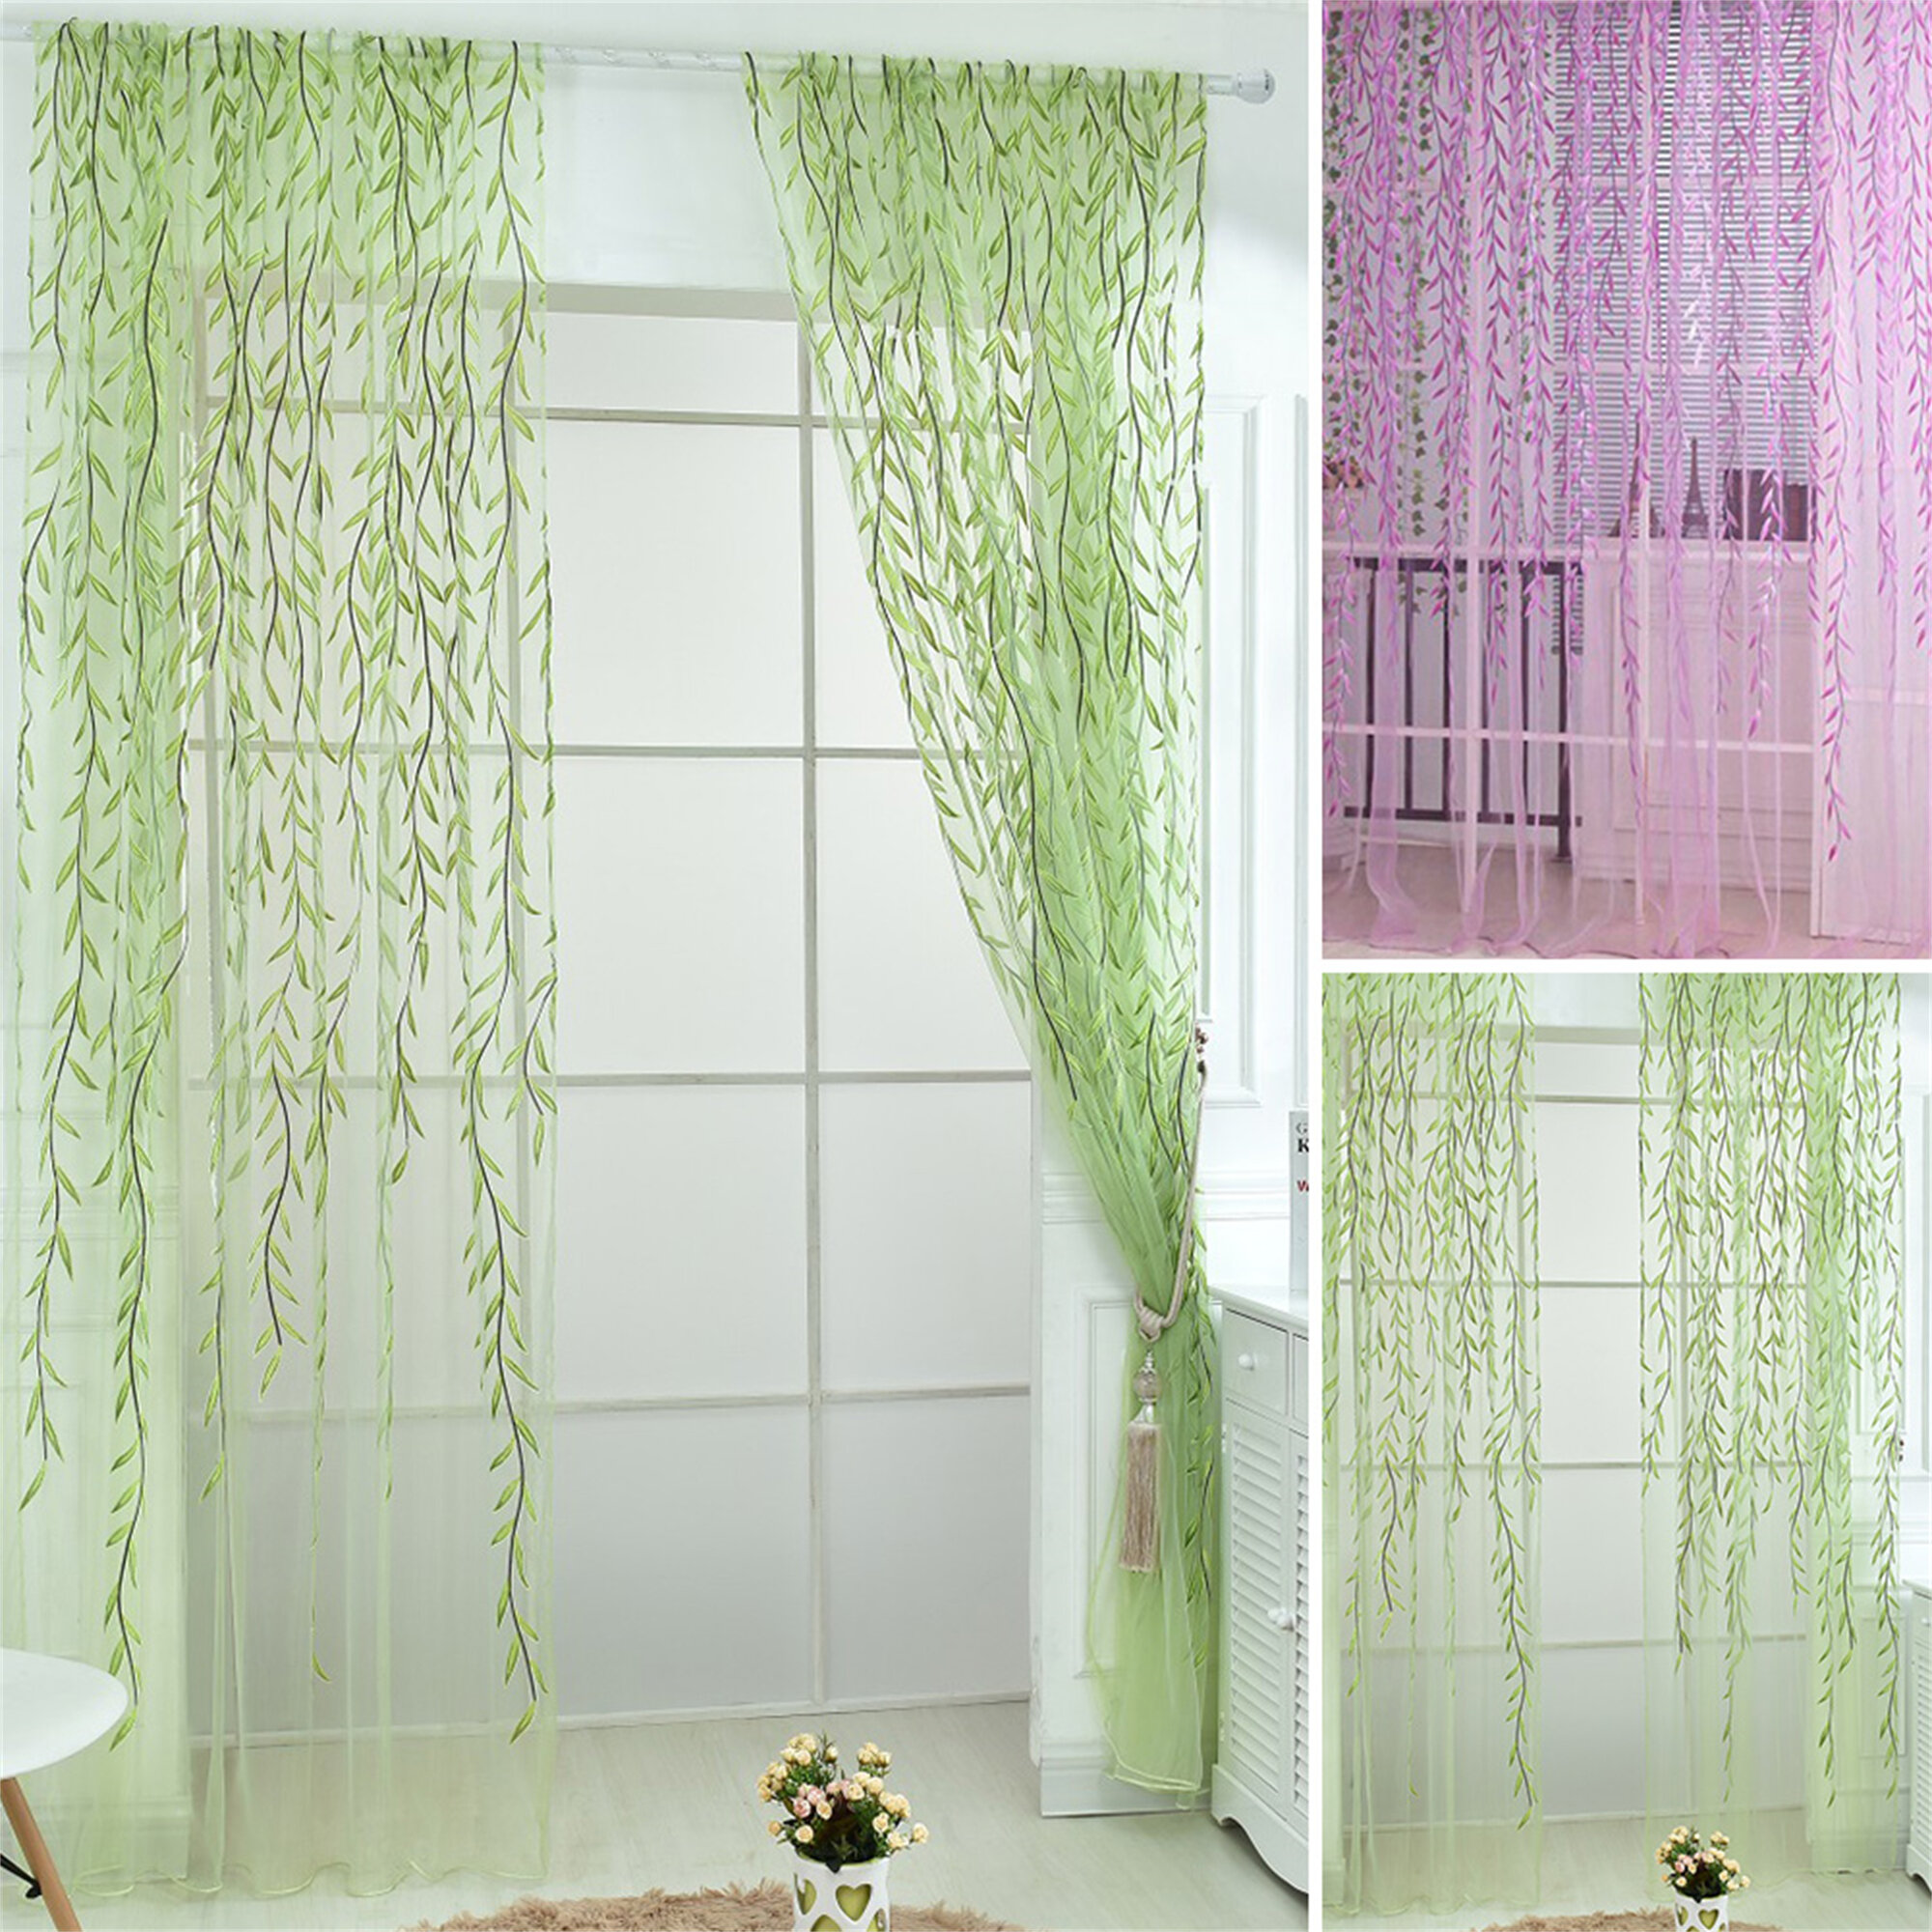 Butterfly Curtains Flower Bedroom Window Door Balcony Sheer Valance Tulle Drapes 